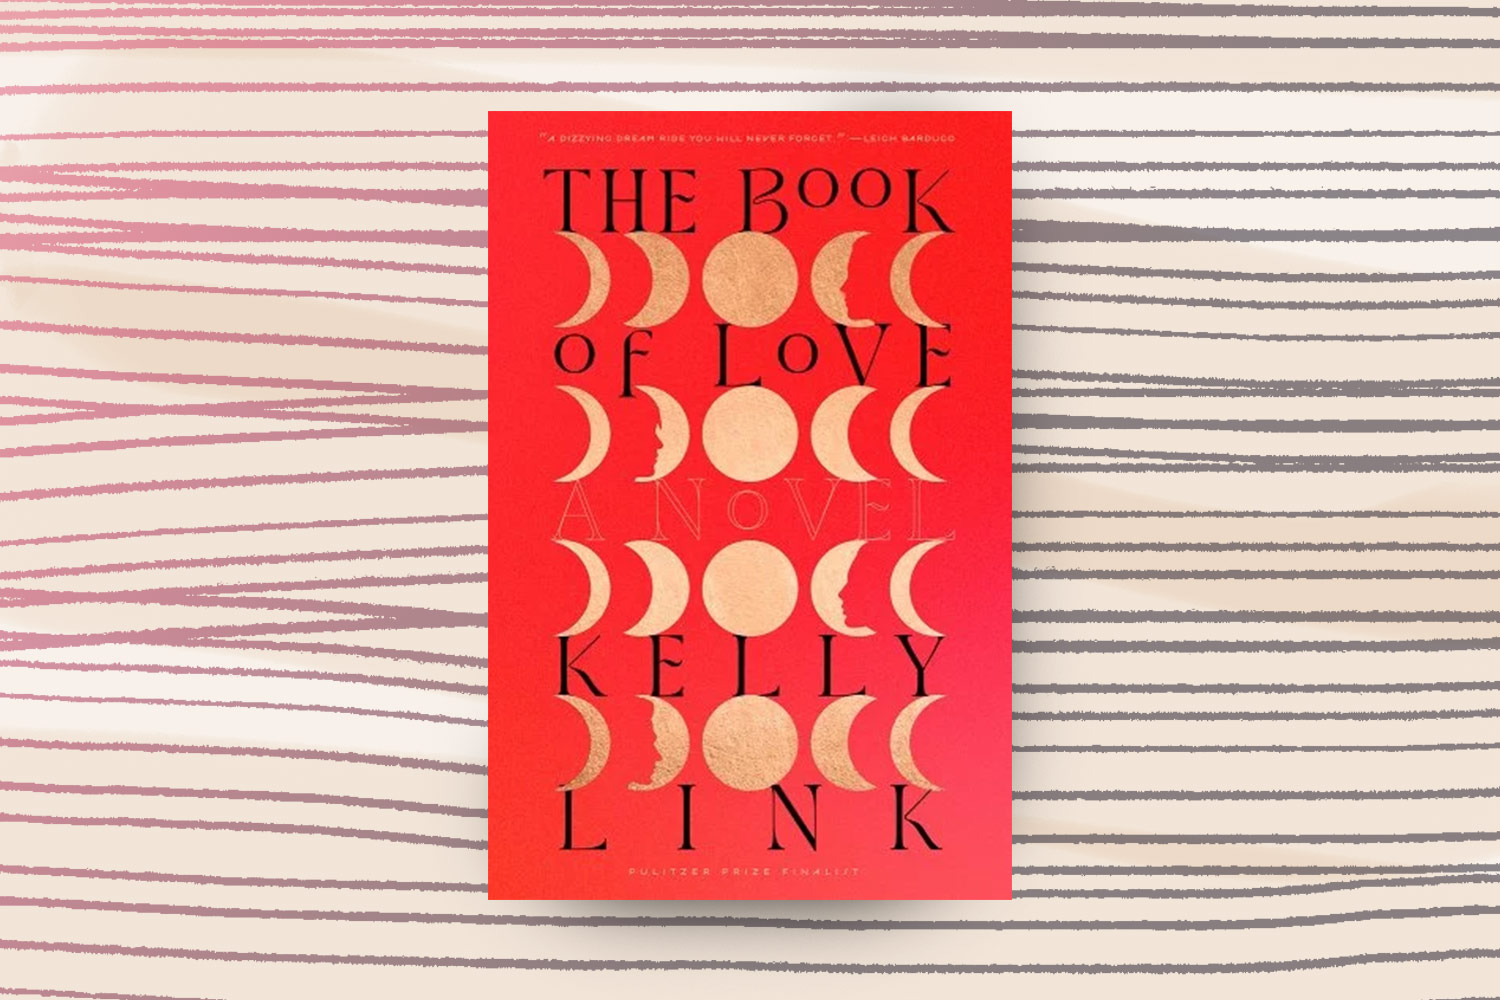 Kelly Link, The Book of Love